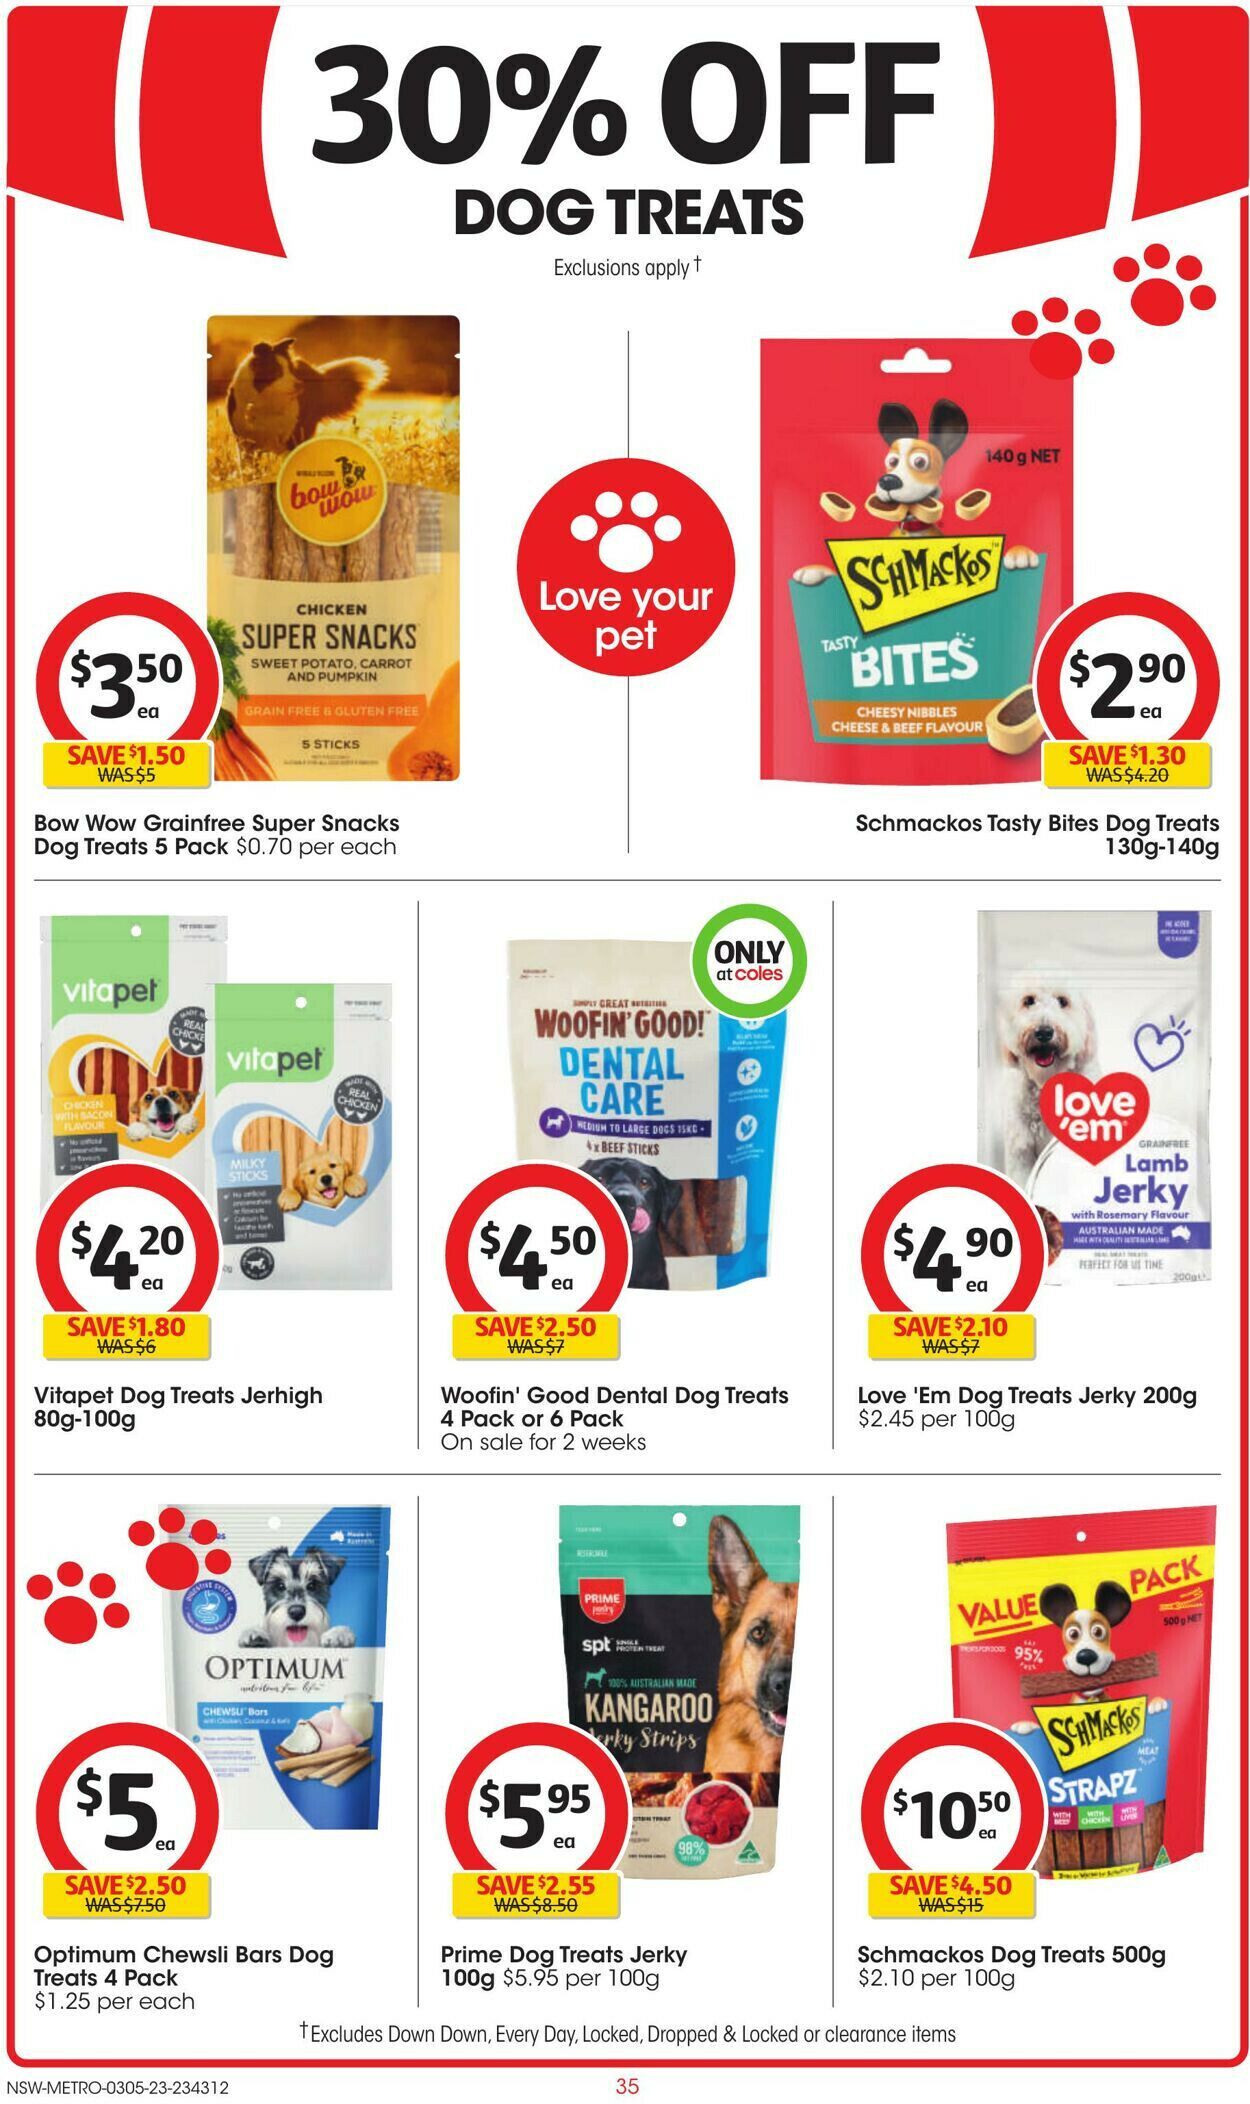 Coles Catalogue from 03/05/2023